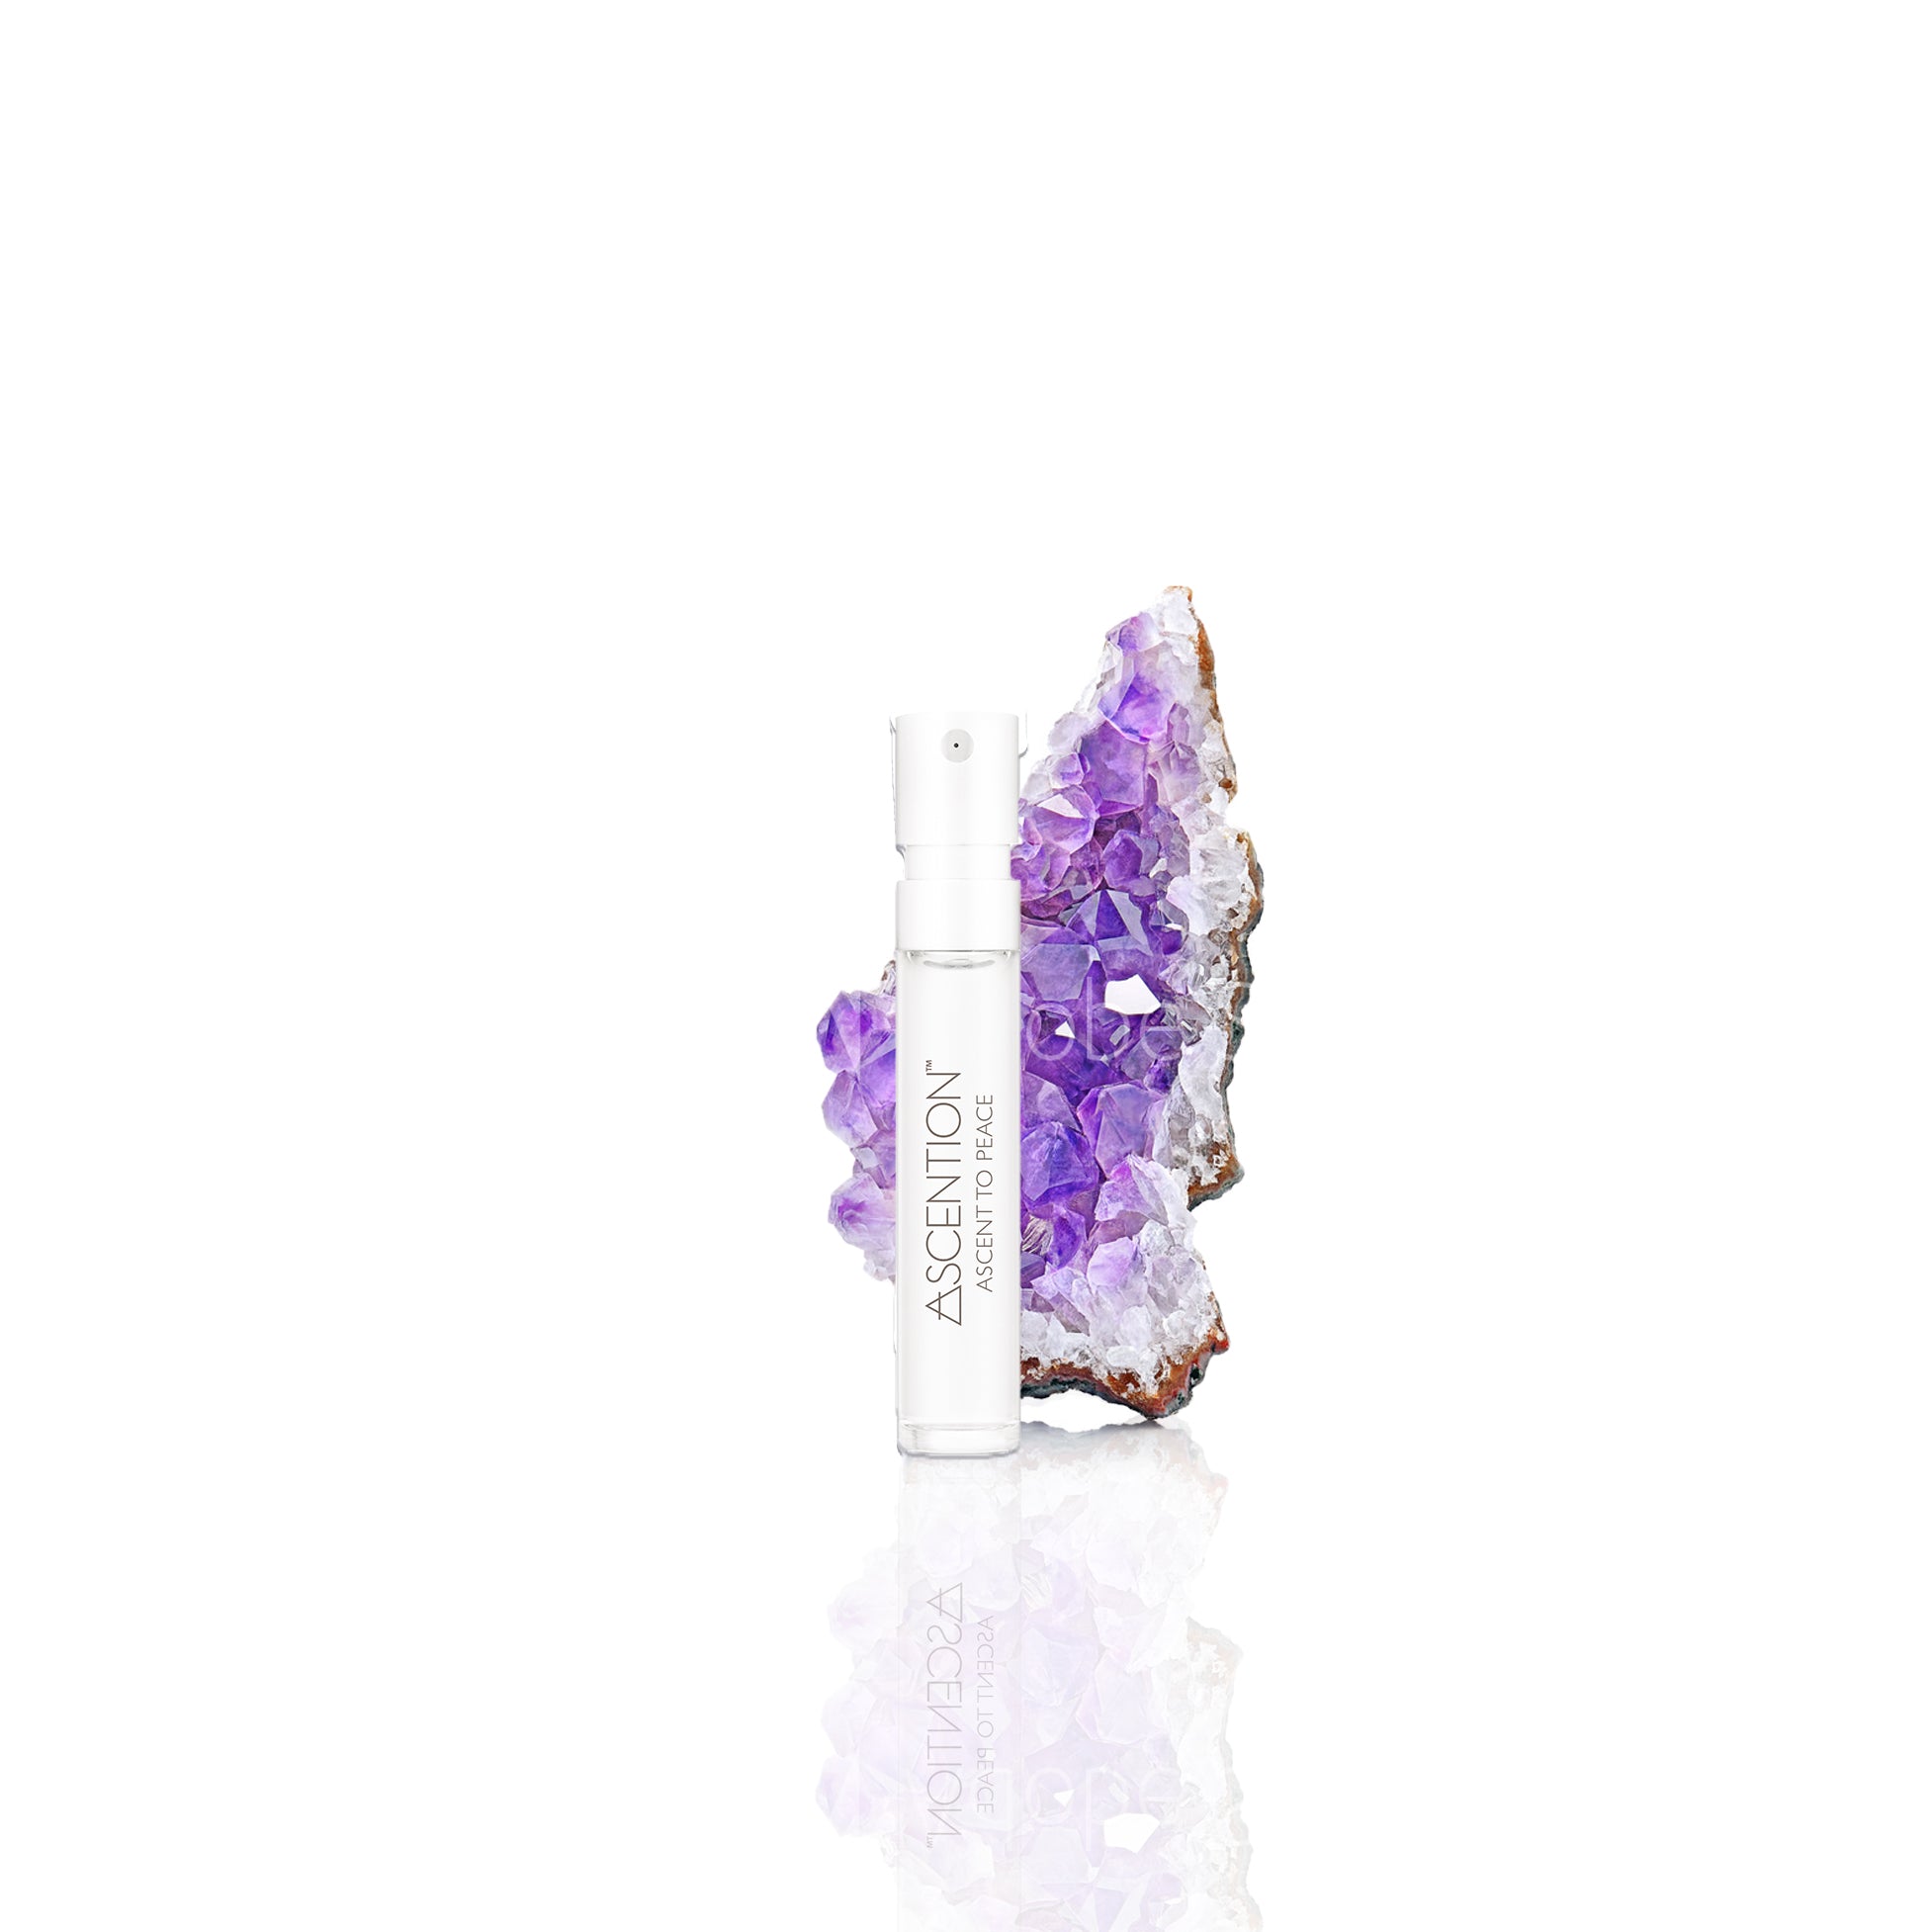 Ascent to Peace with Amethyst crystal, scent with intent samples, don't just smell good, feel good. Discover, experience and manifest with scent resonates with you. Ascention is elevating the clean fragrance experience into wellness.